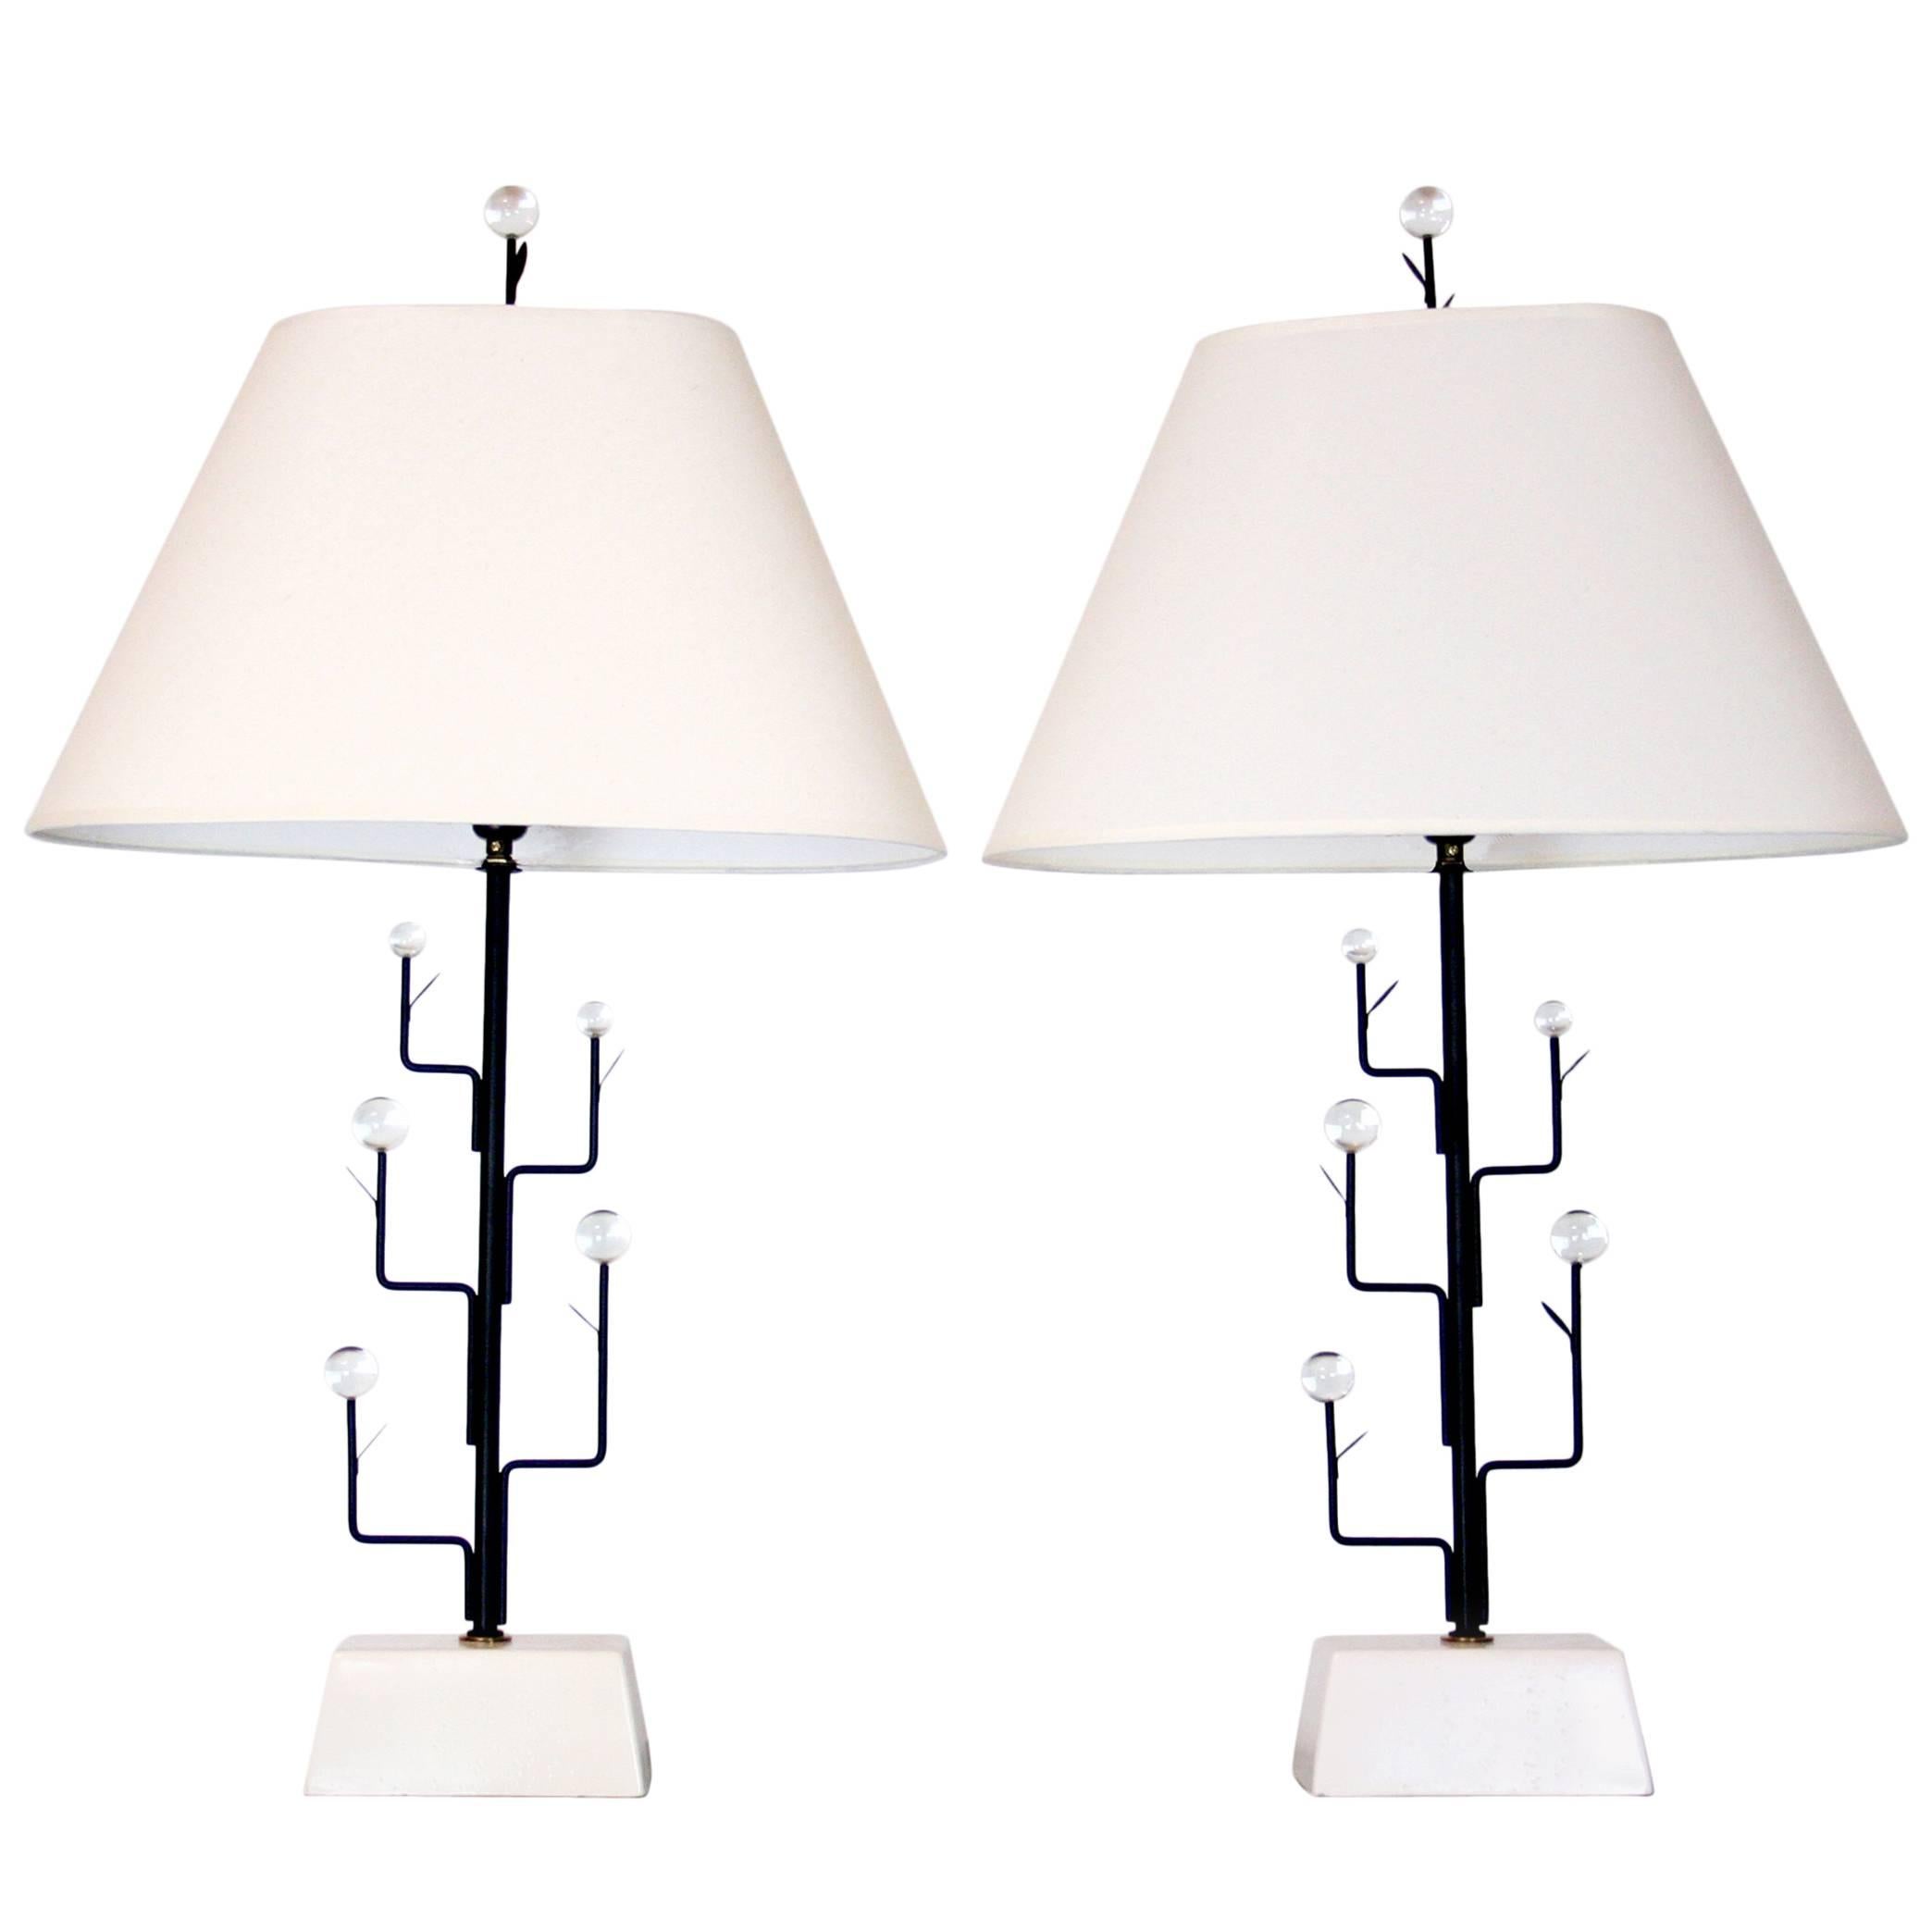 Pair of Italian Mid-Century Modern Metal and Glass "Tree" Lamps For Sale